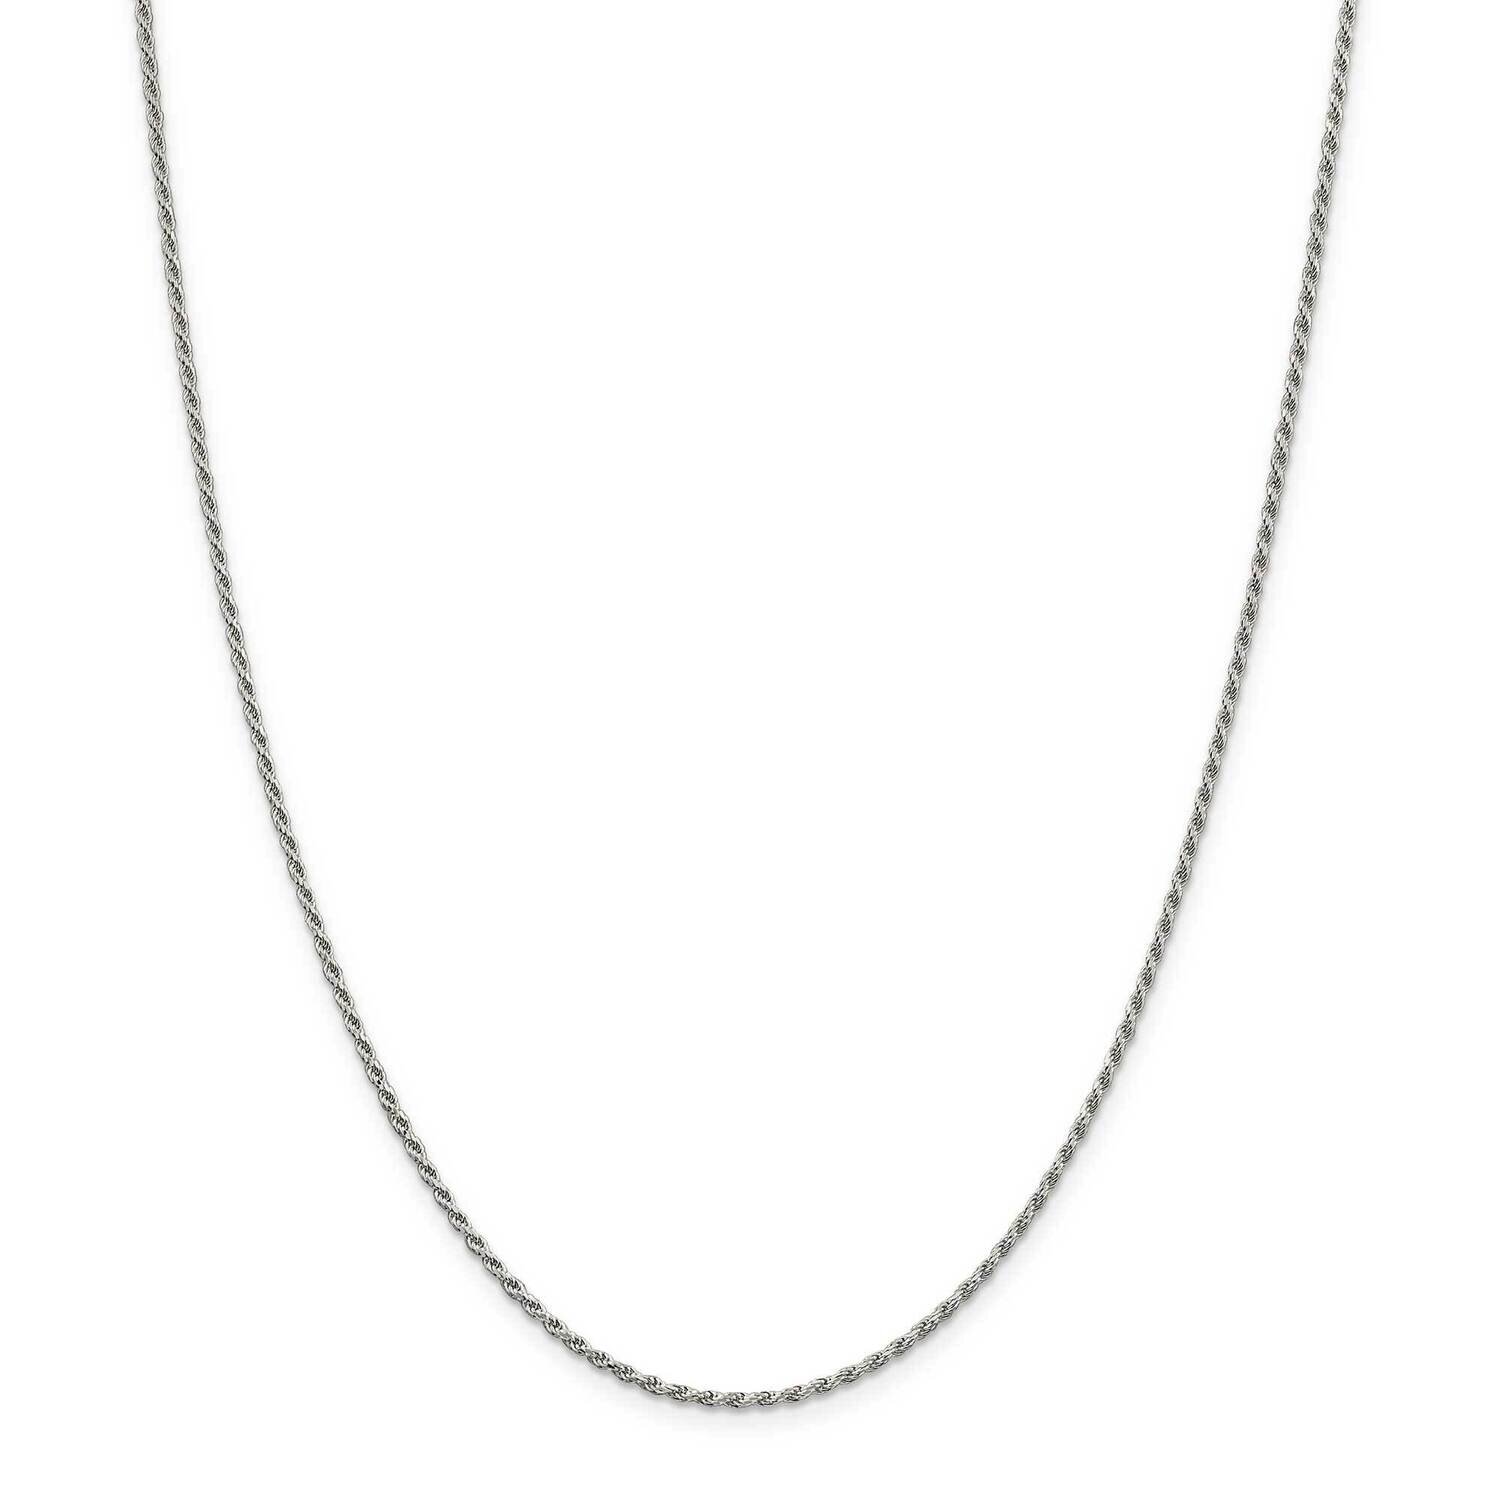 1.7mm Diamond-Cut Rope Chain with 4 Inch Extender 22 Inch Sterling Silver Rhodium-Plated QDC025RH-22